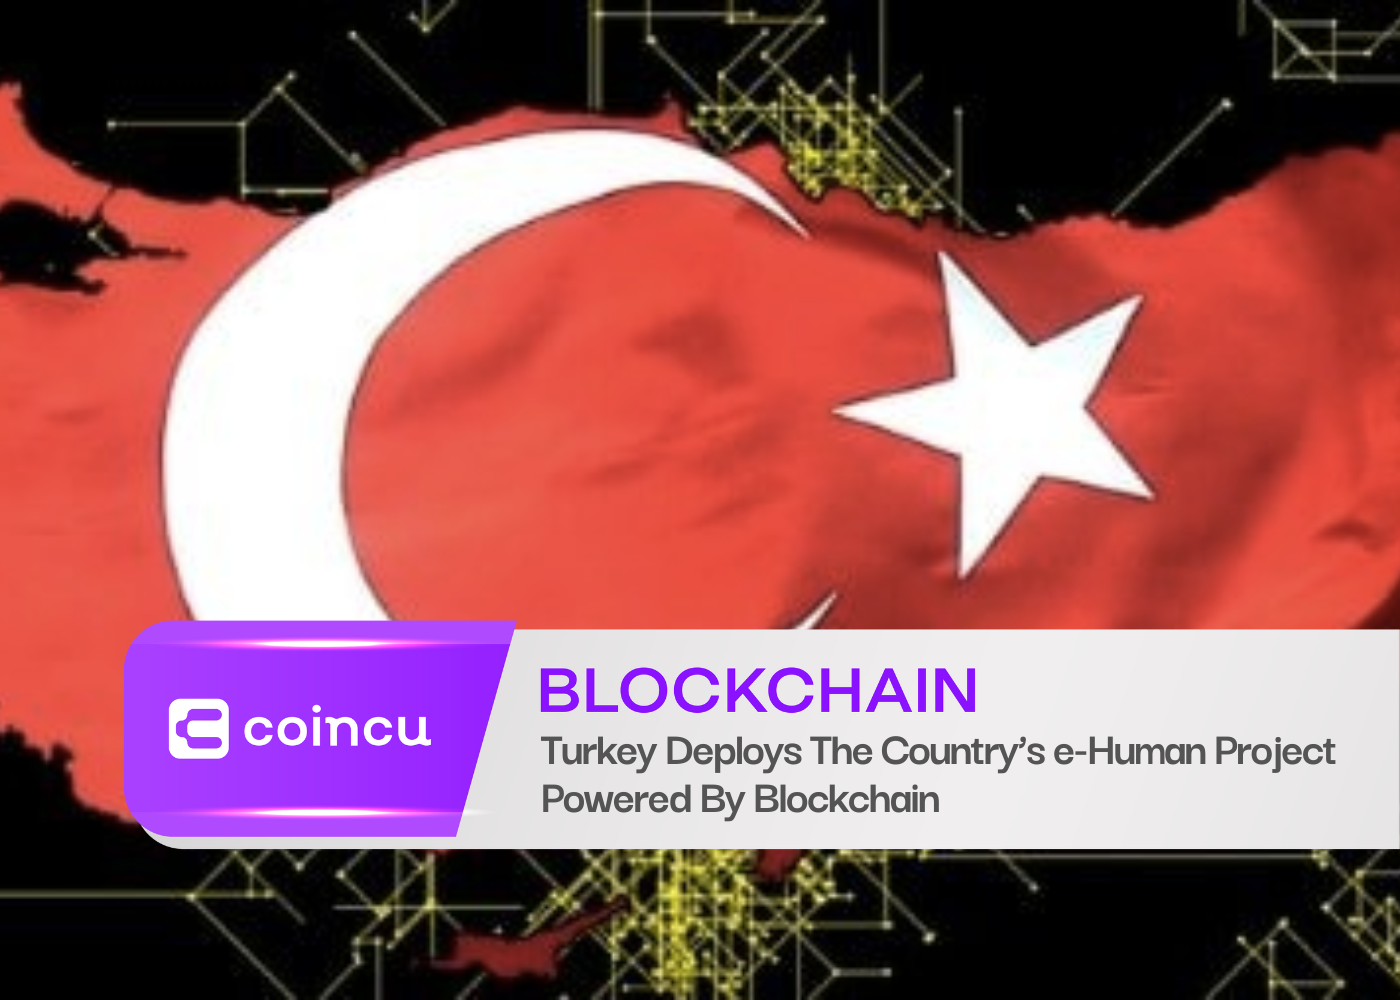 Turkey Deploys The Country’s e-Human Project Powered By Blockchain